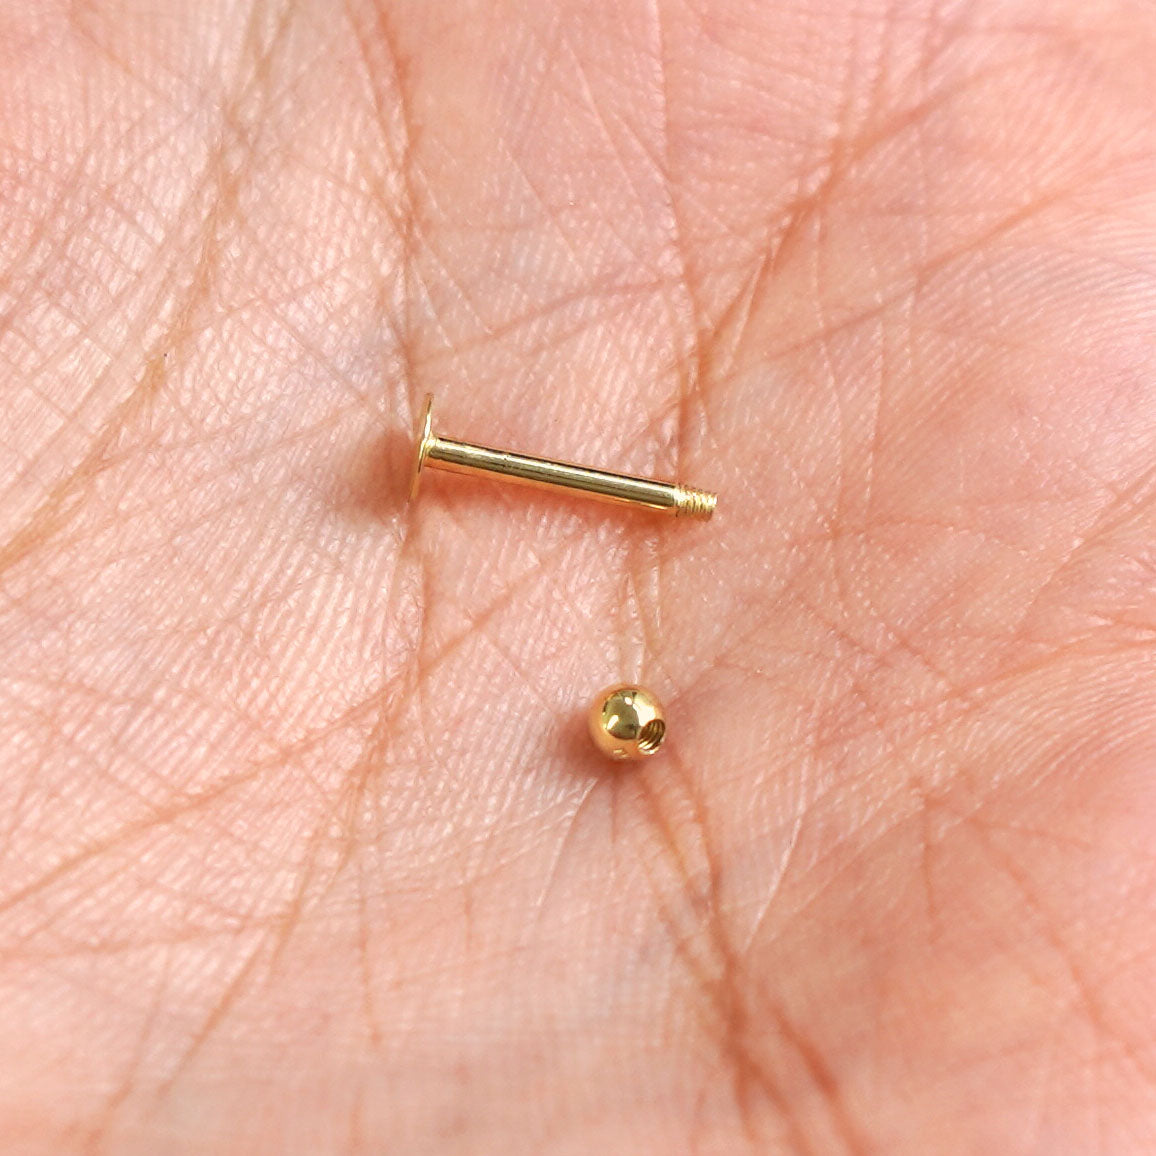 A solid yellow gold Small Labret Piercing with the externally threaded ball closure unscrewed in the palm of a model's hand